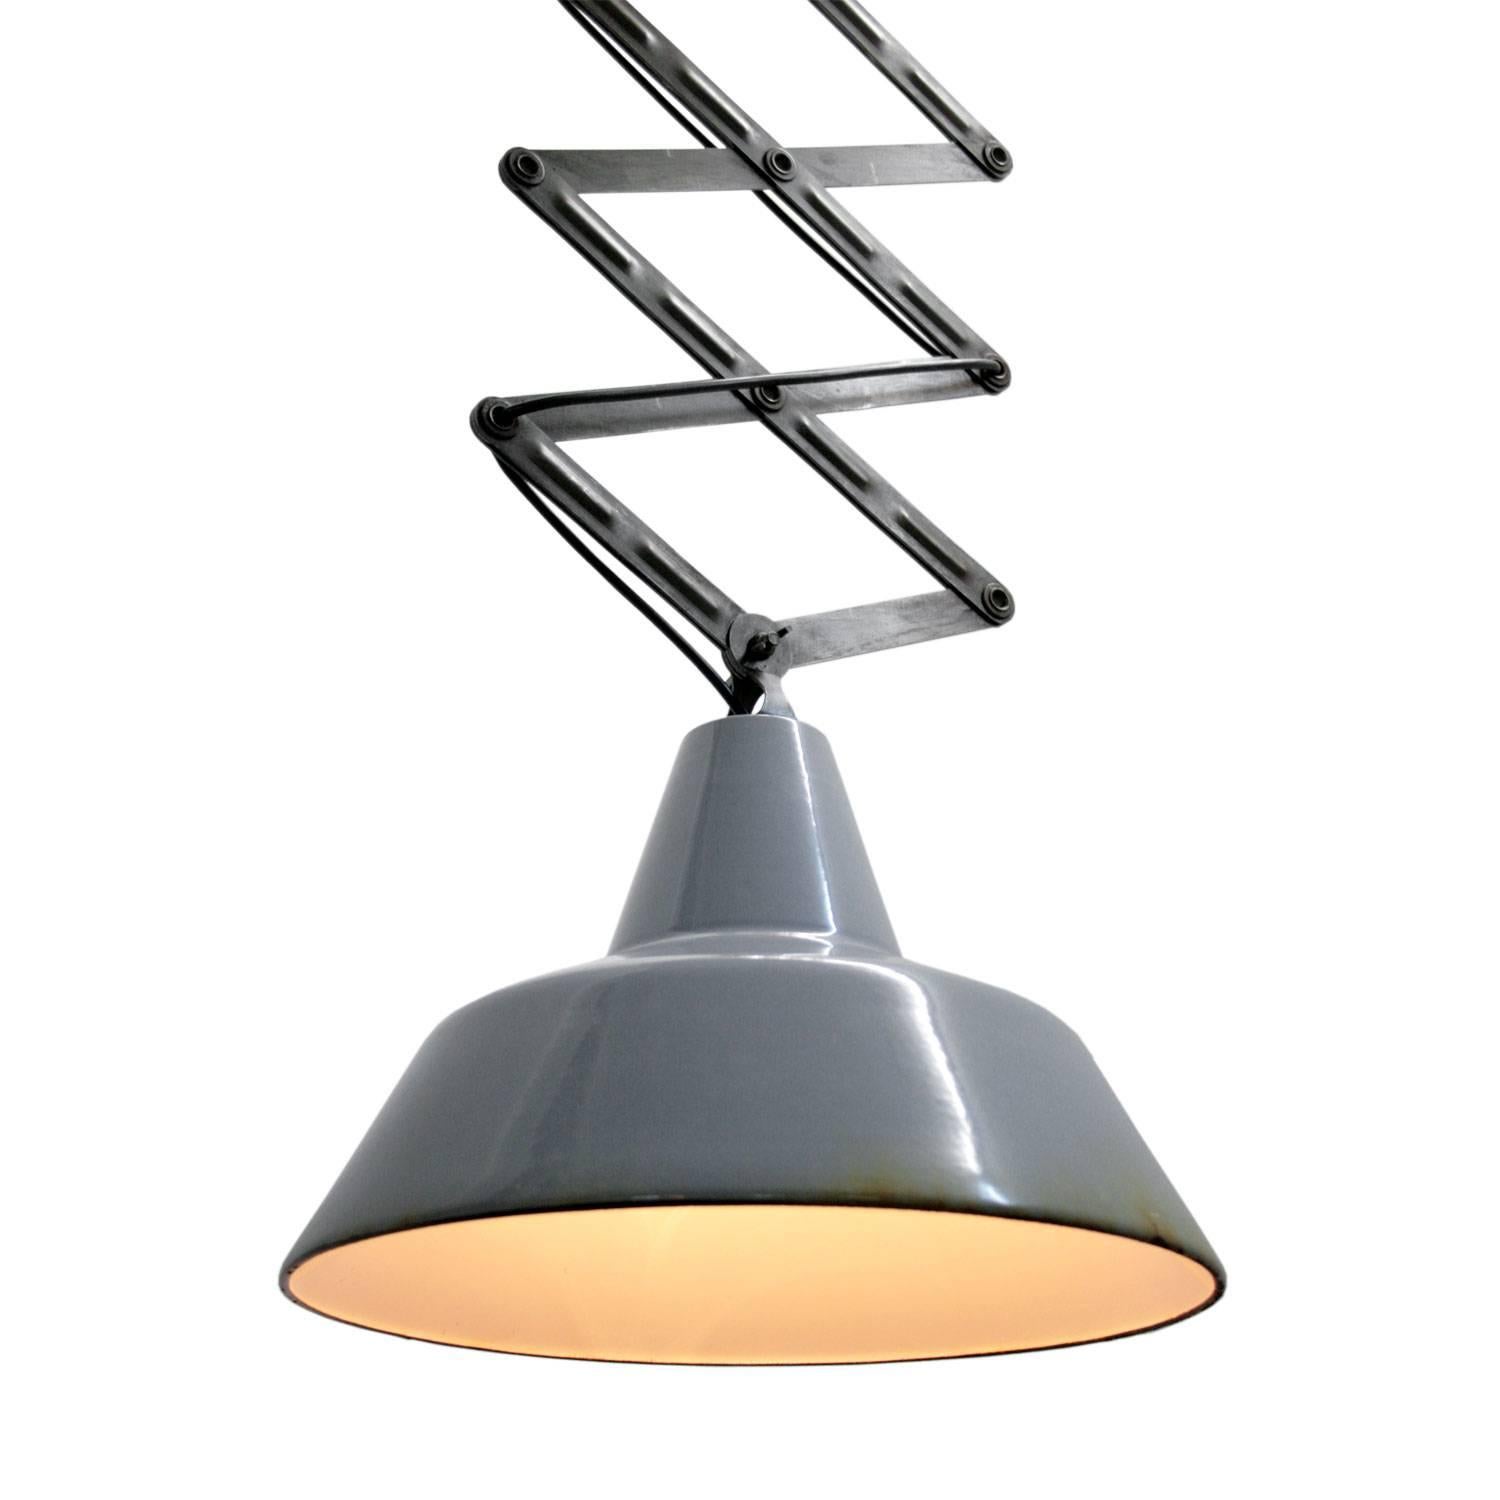 Scissor varia steel pendant. Grey enamel. White interior. Mounting plate: 12 × 7 cm.

Weight: 5.8 kg / 12.8 lb

Priced individual item. All lamps have been made suitable by international standards for incandescent light bulbs, energy-efficient and